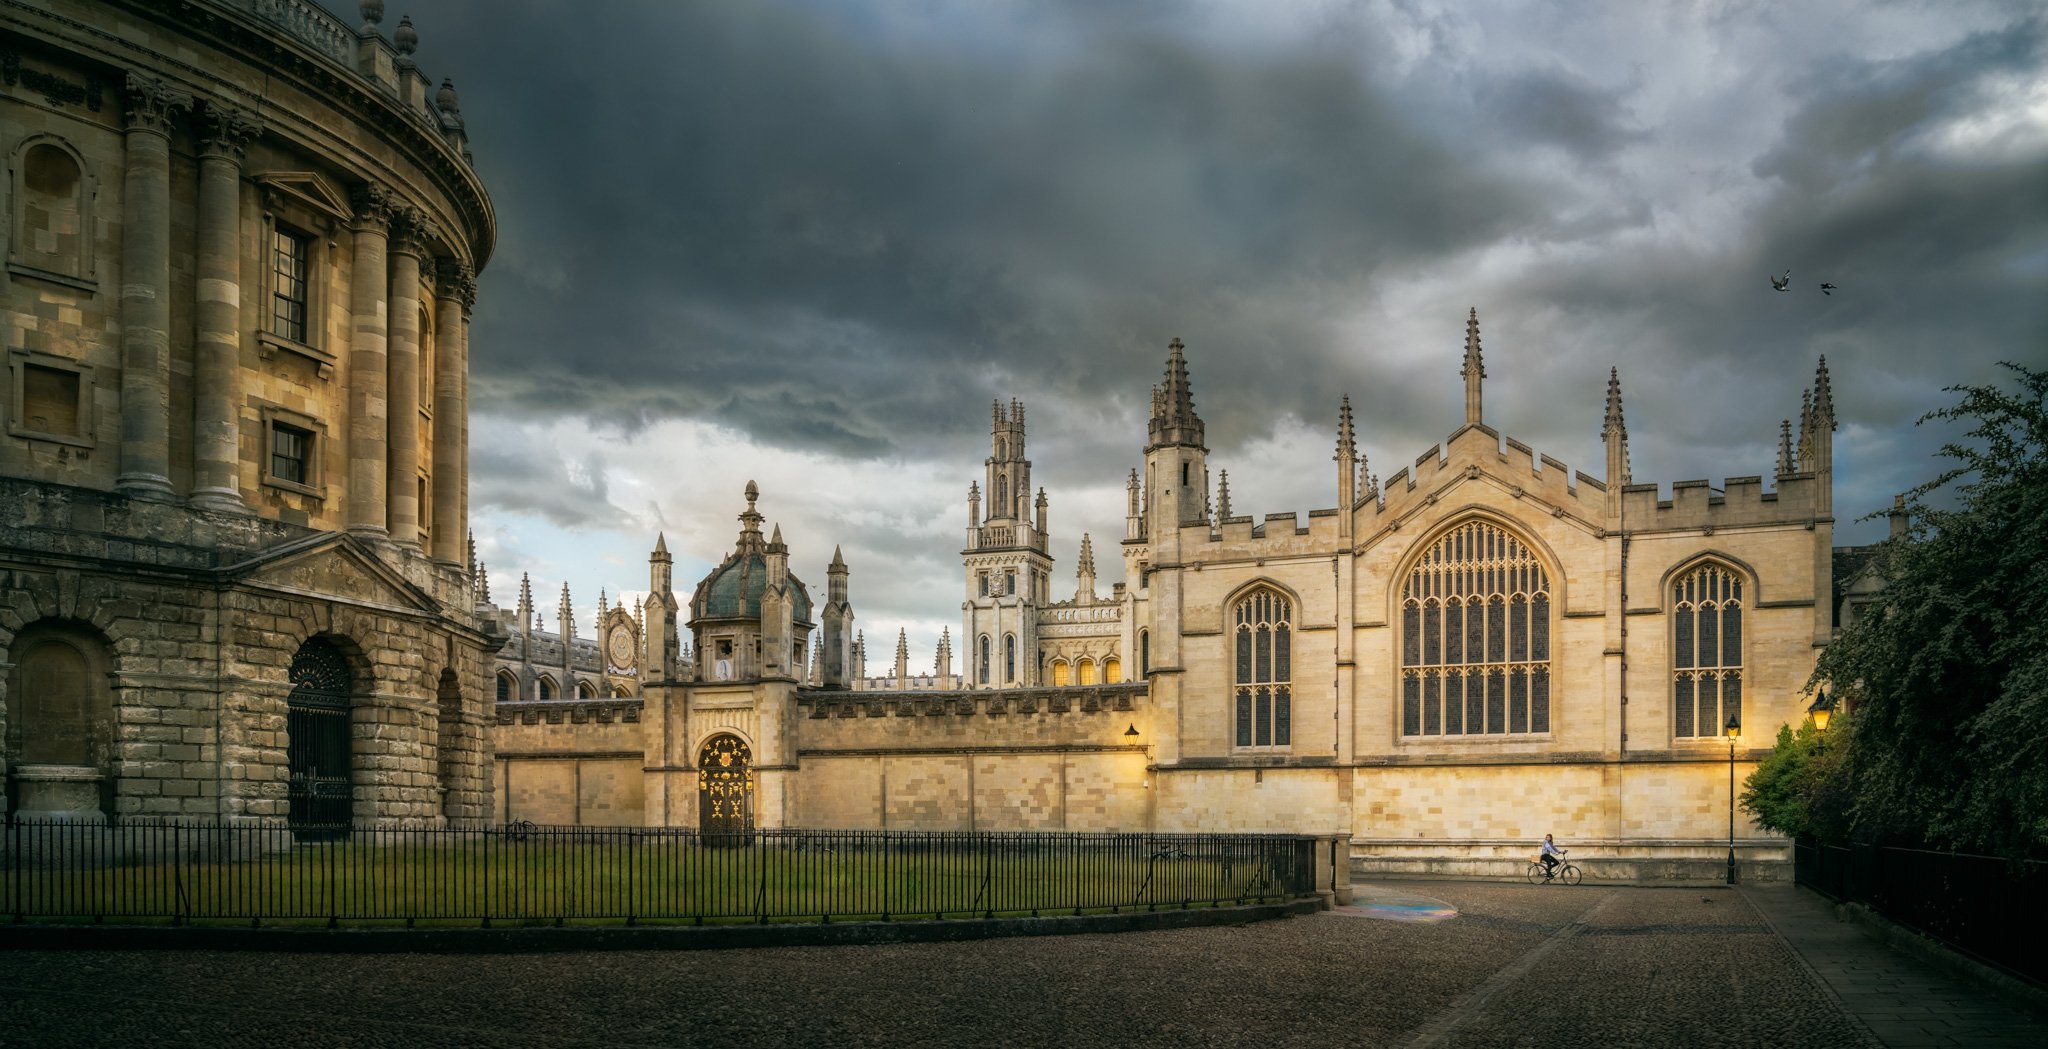 Radcliffe Camera, architecture, mood, storm, Ross McGree